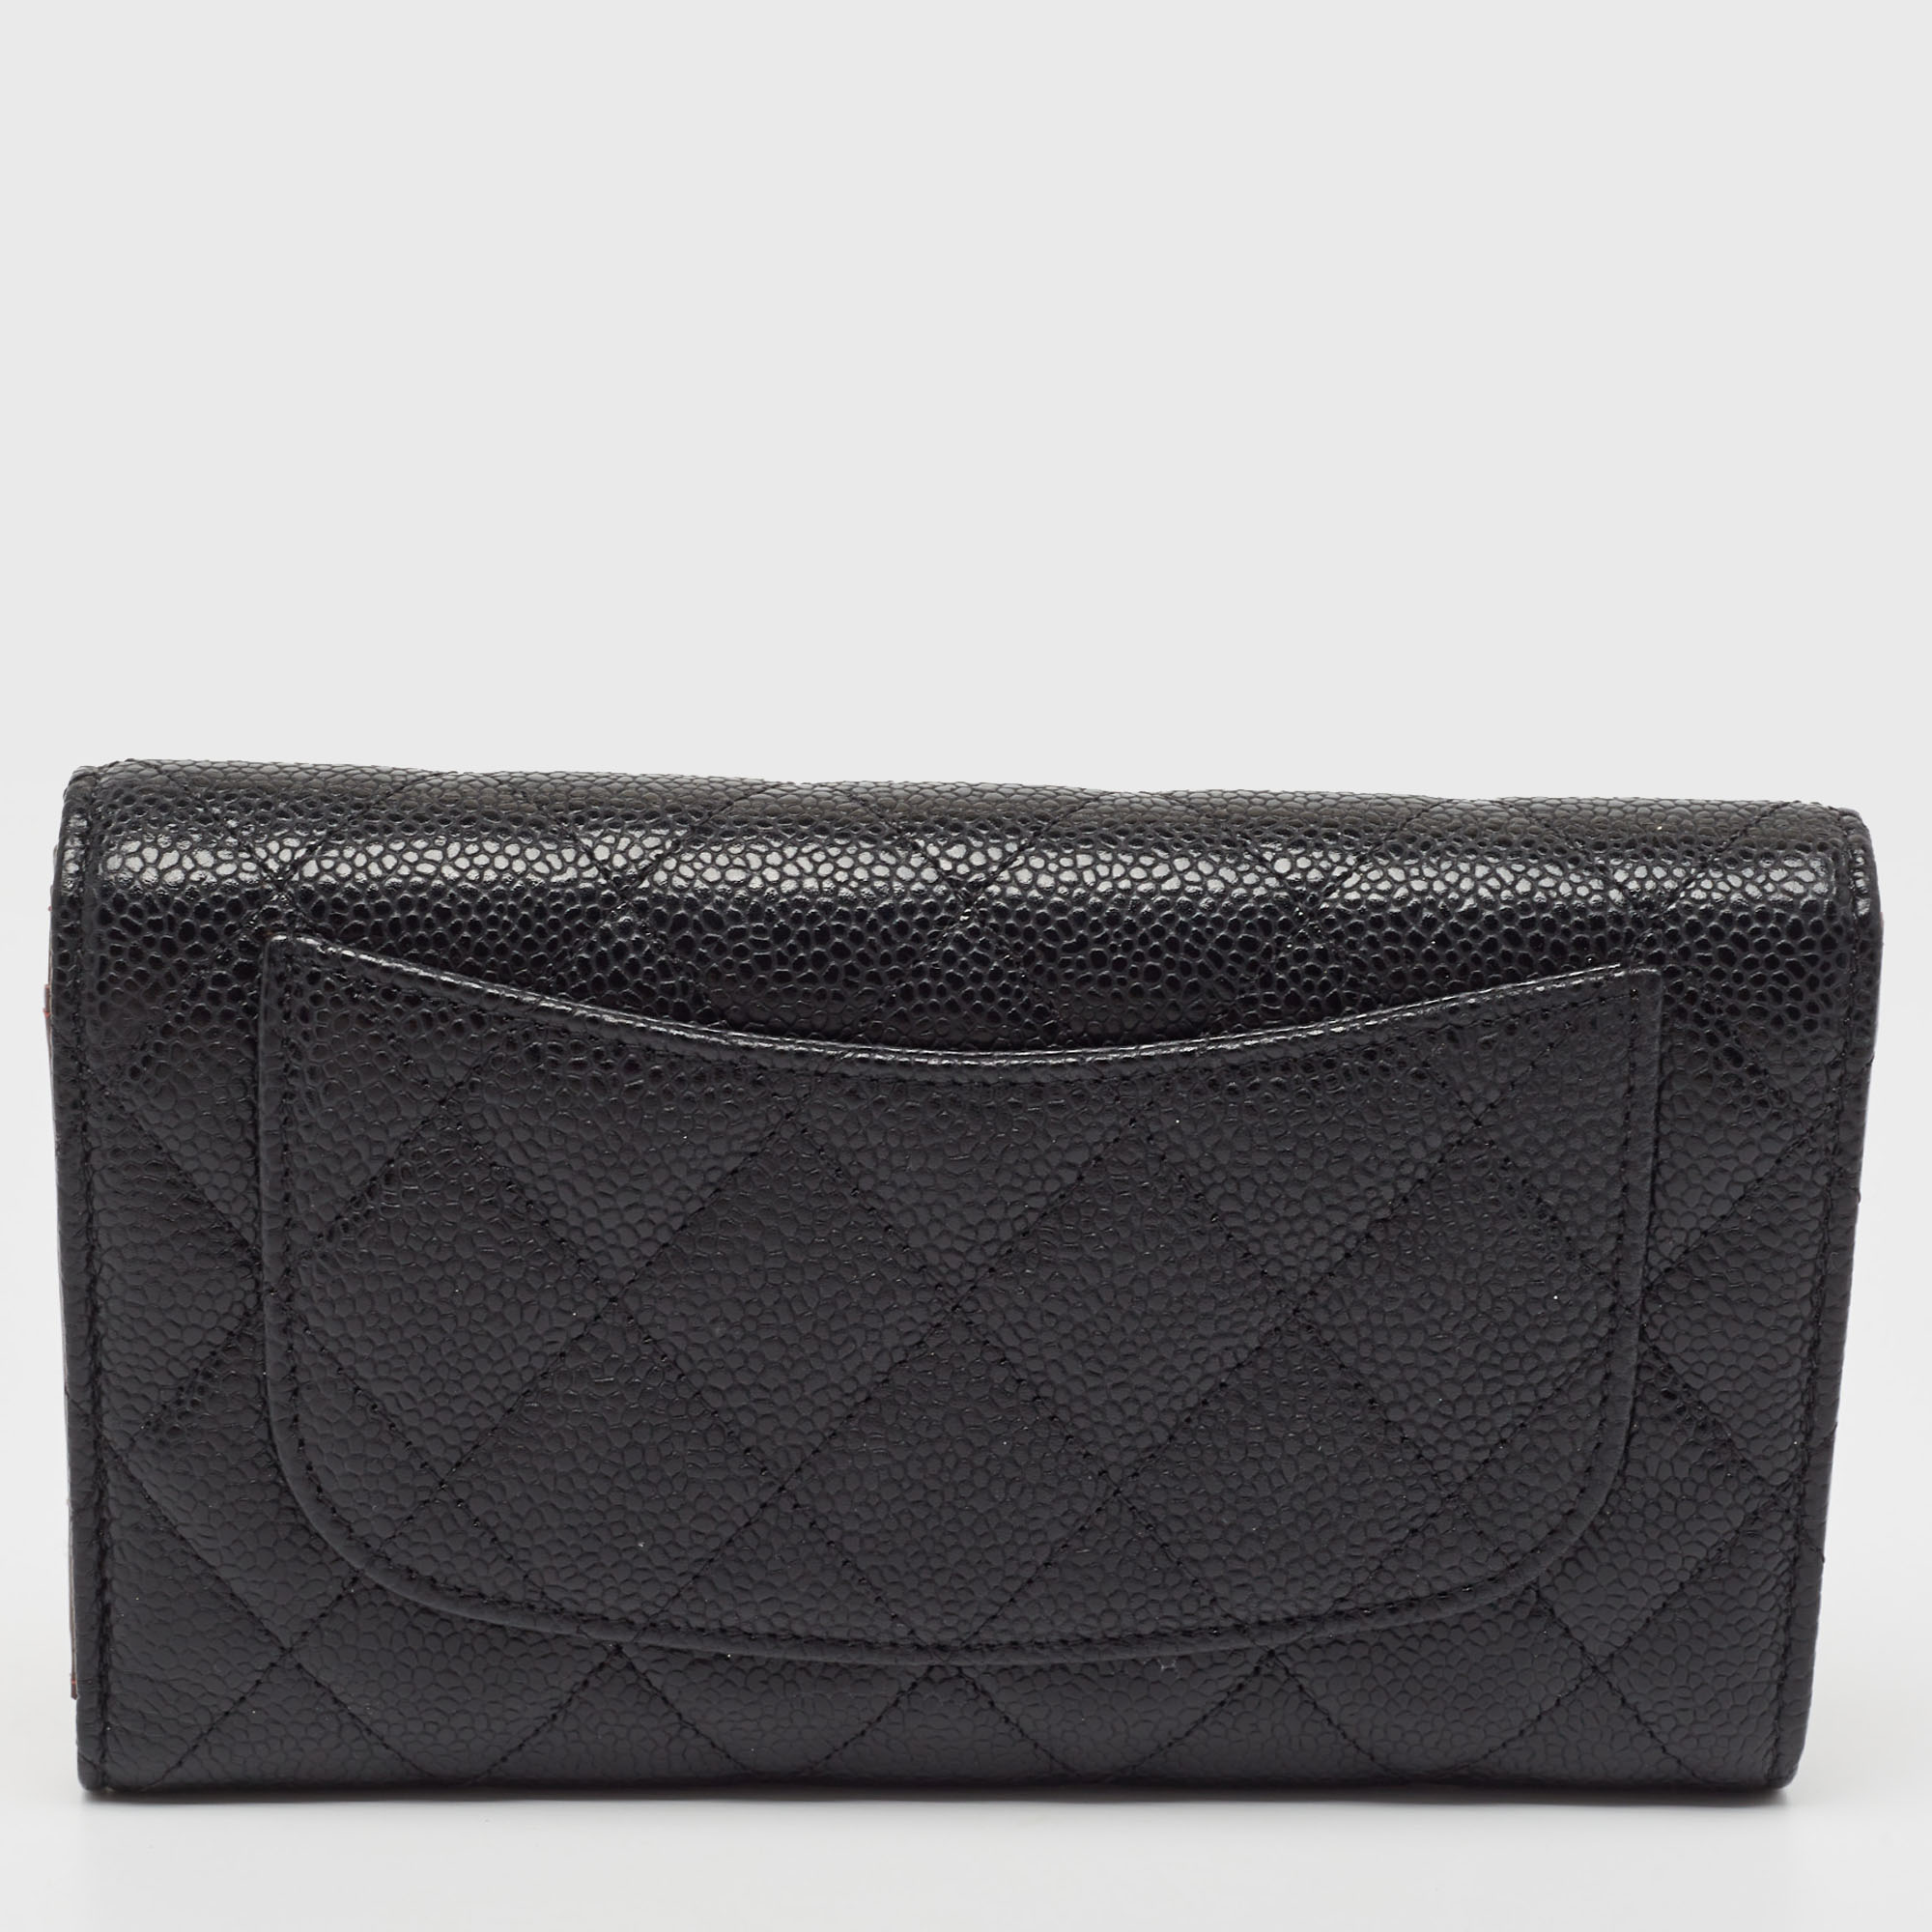 Chanel Black Quilted Caviar Leather Classic Flap Wallet